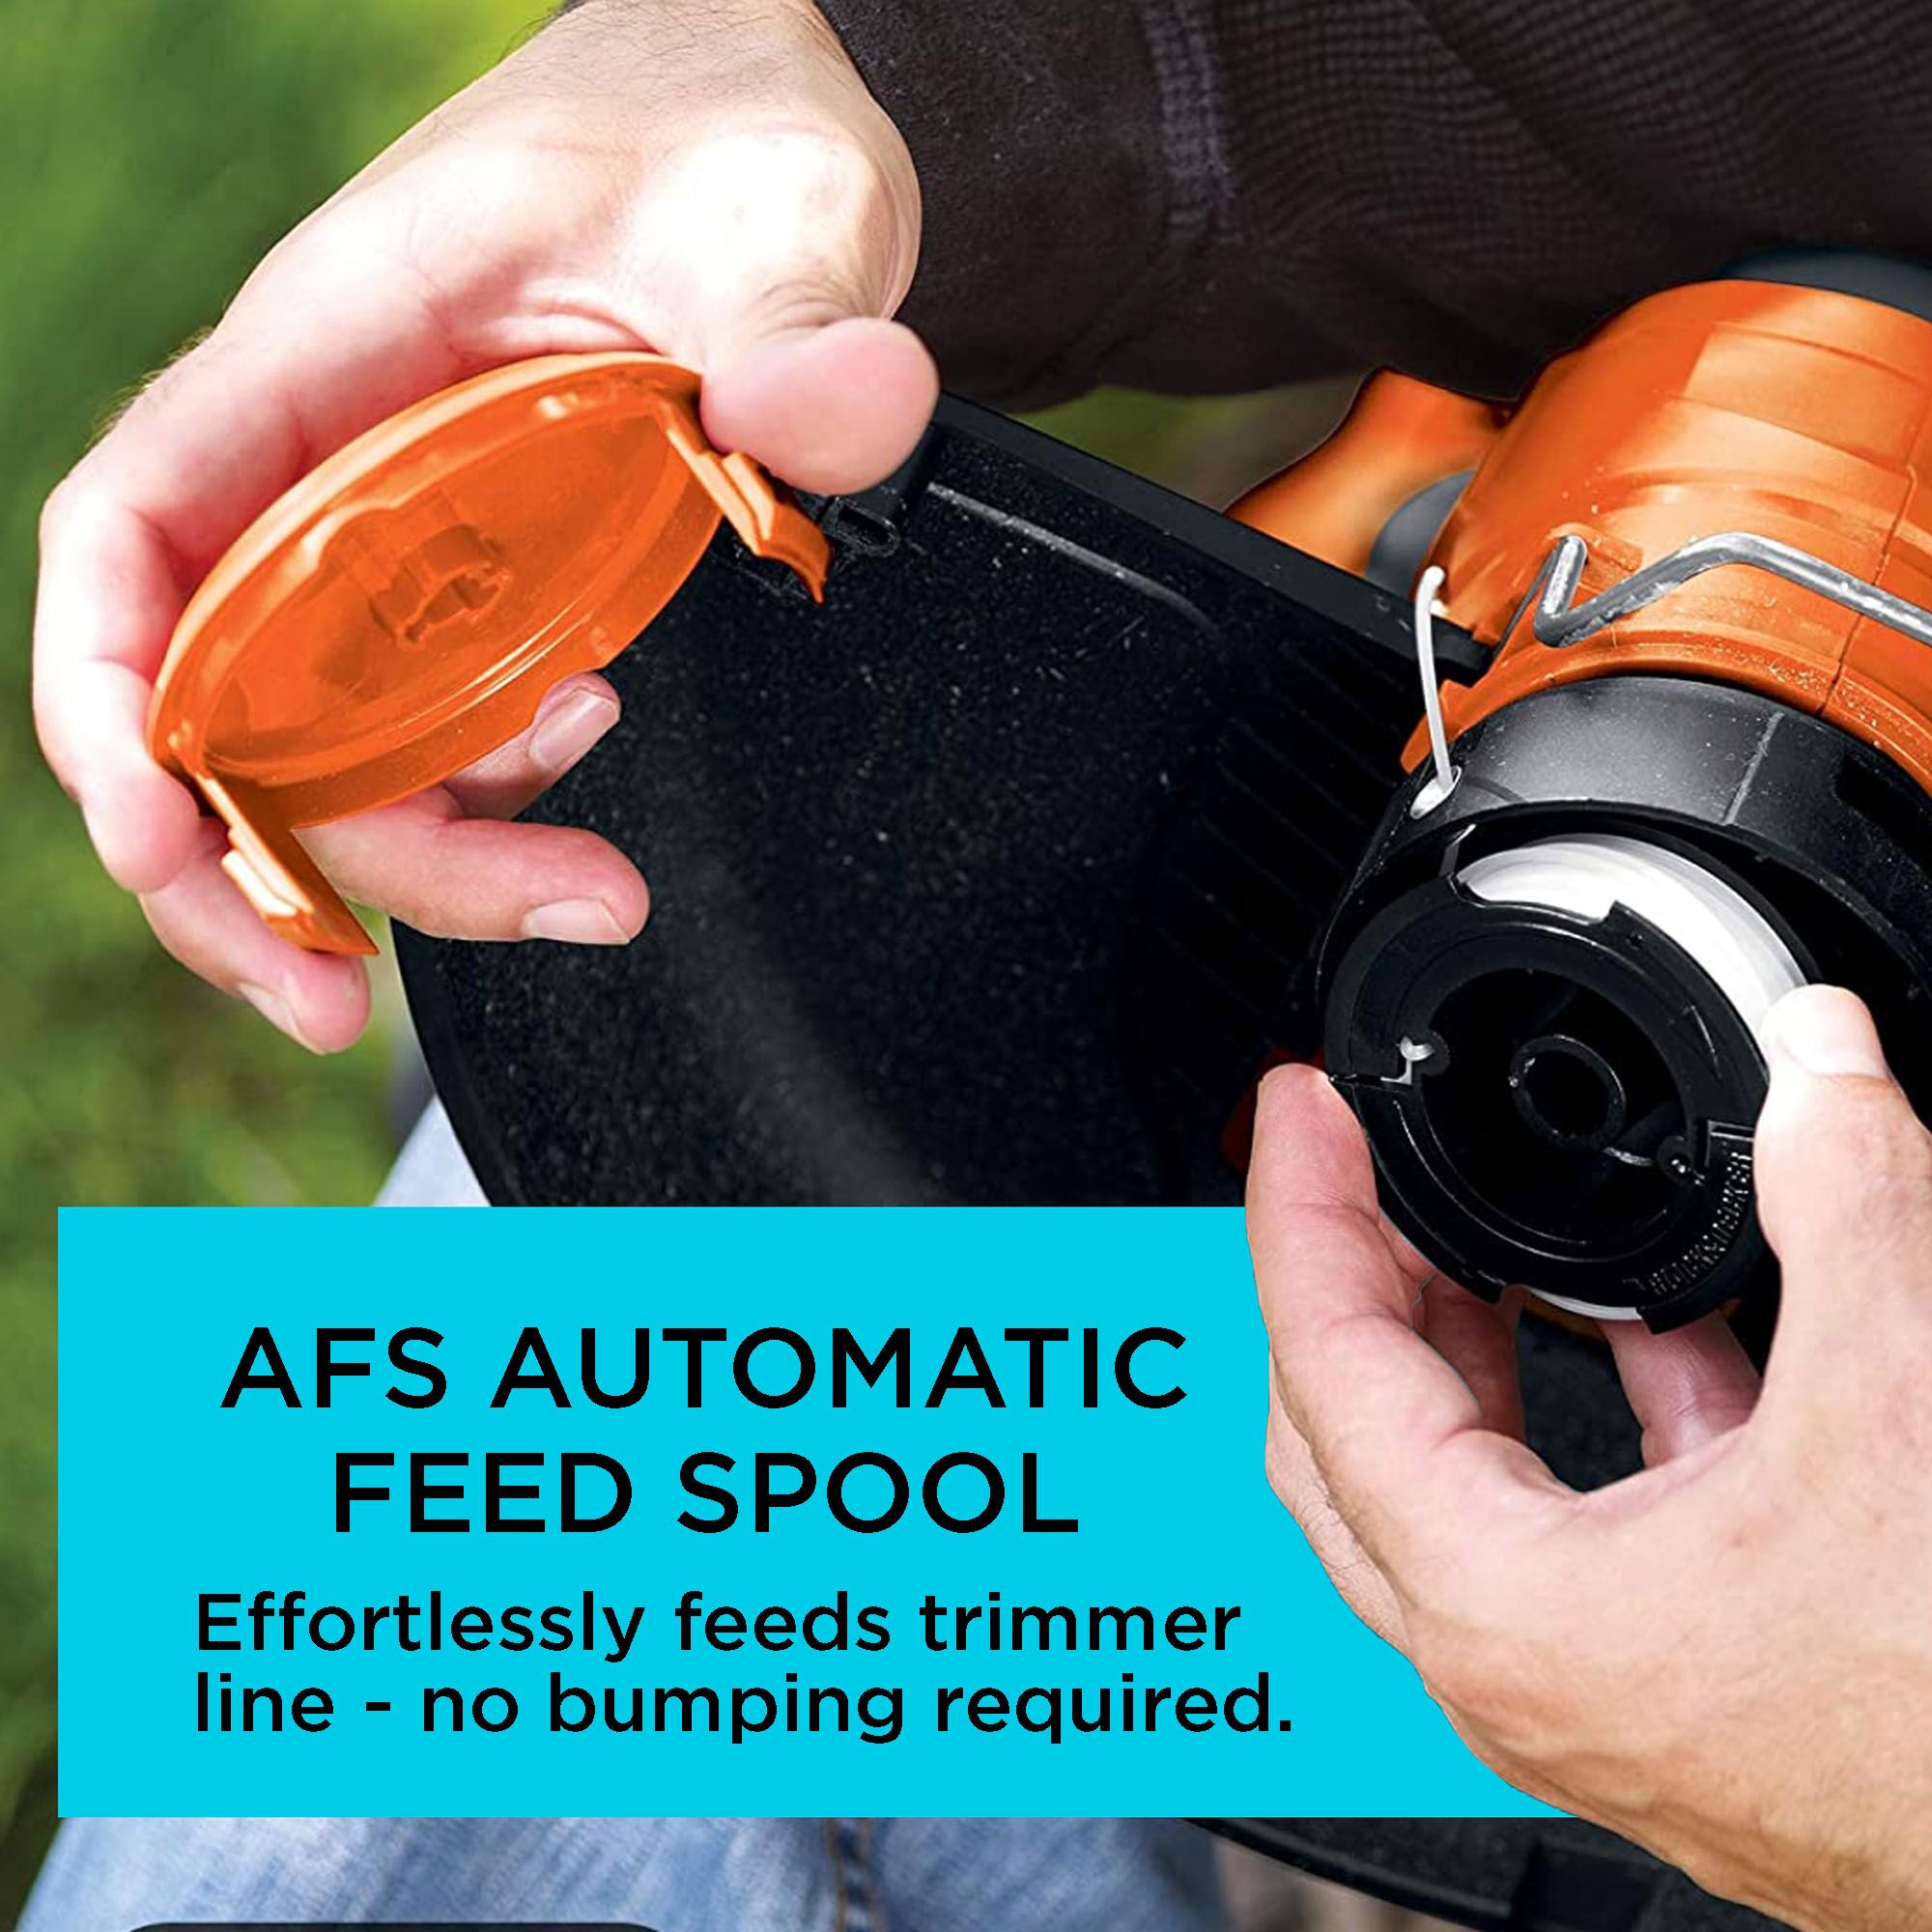 BLACK+DECKER 0.065 in. x 30 ft. Replacement Single Line Automatic Feed Spools AFS for Electric String Grass Trimmer/Edger (3-Pack). AFS automatic feed spool effortlessly feeds trimmer line, no bumping required.